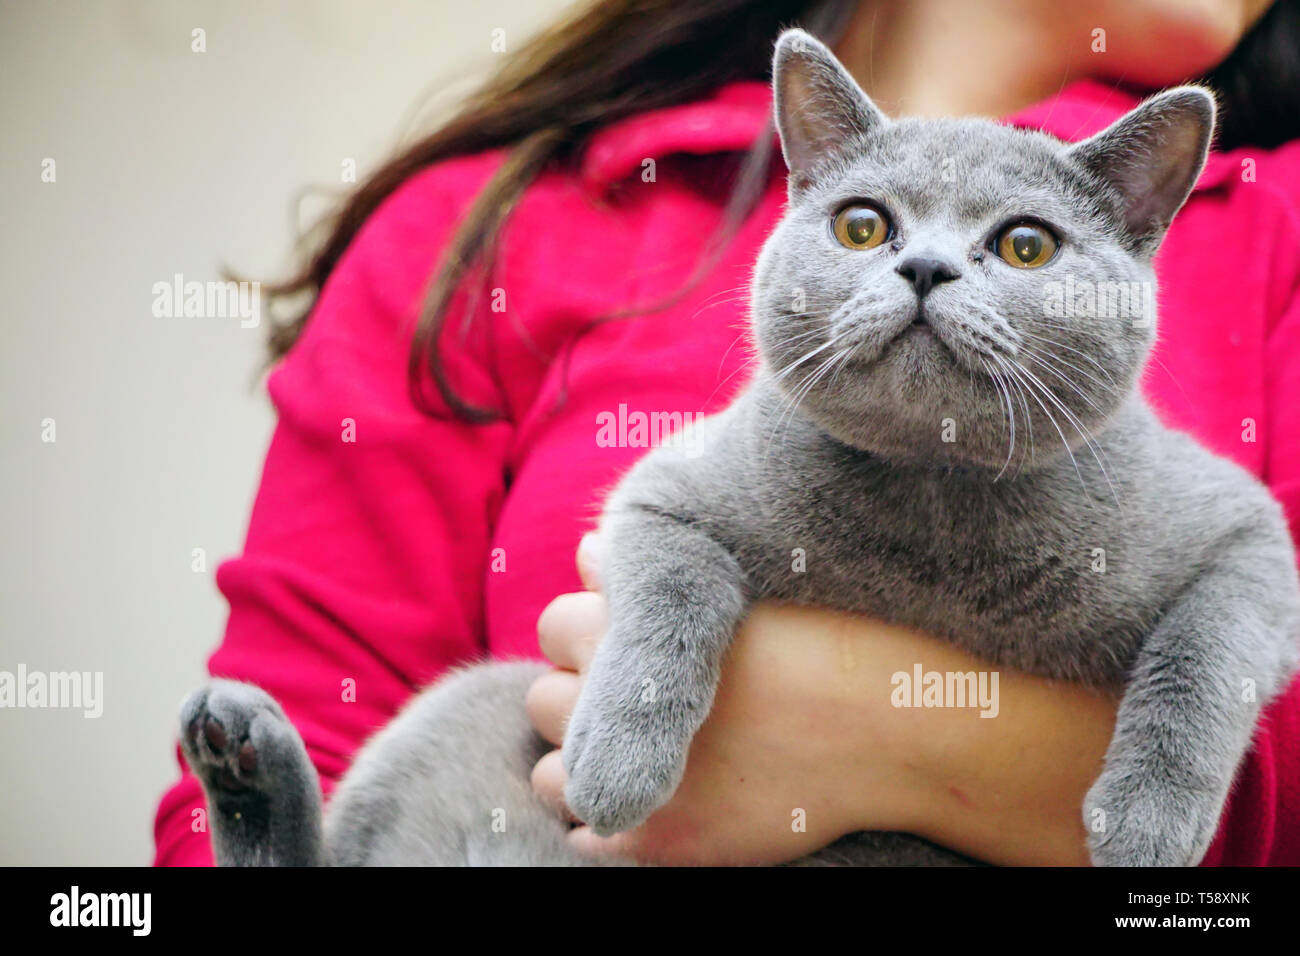 British Shorthair Cat With Grey Fur And Amber Eyes Stock Photo